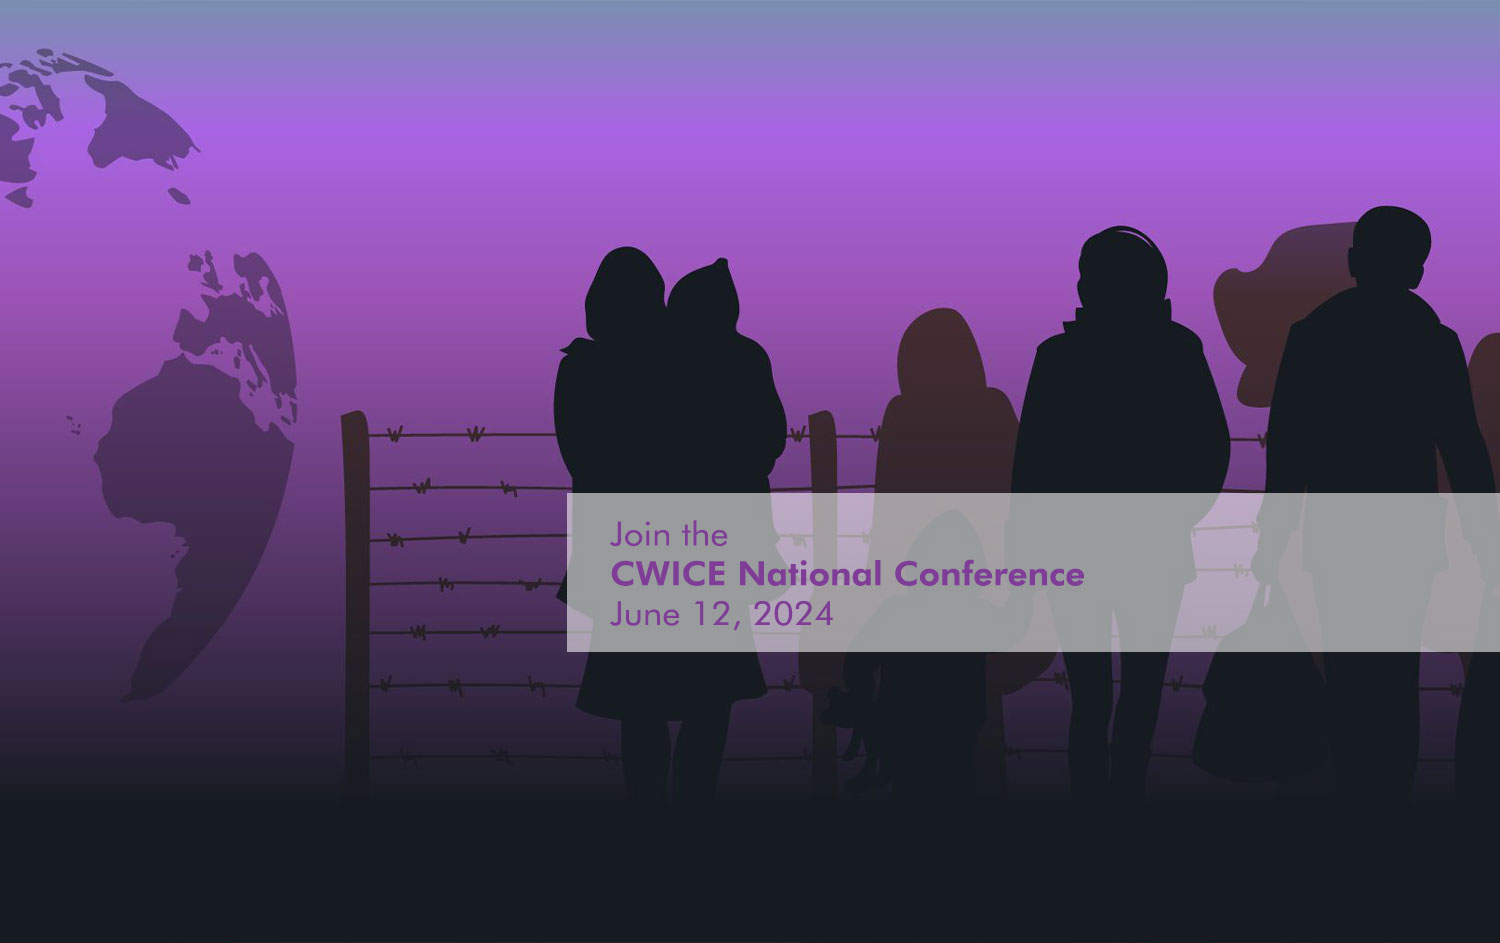 Join the CWICE National Conference June 12, 2024